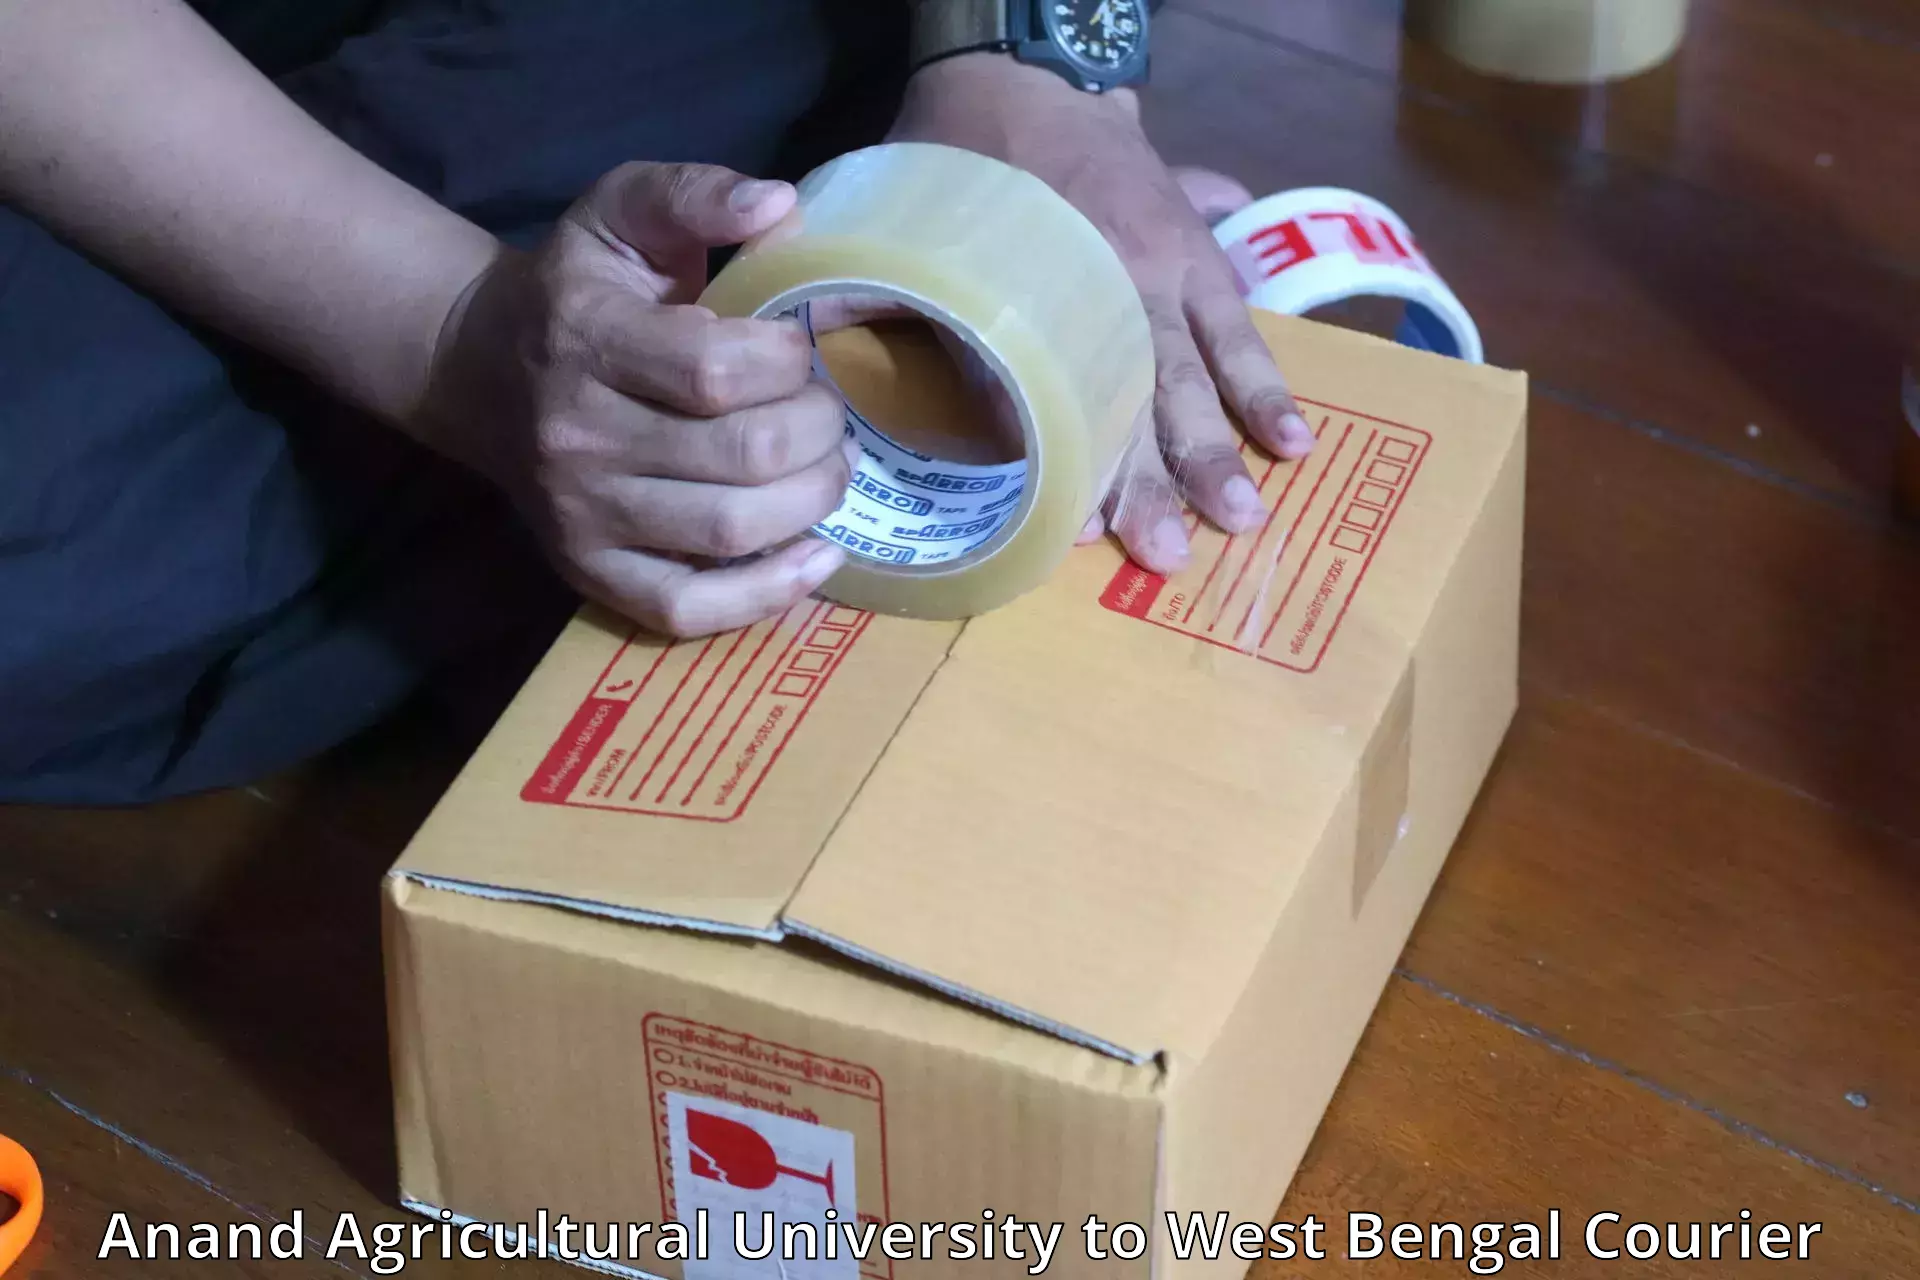 International baggage delivery Anand Agricultural University to Panskura